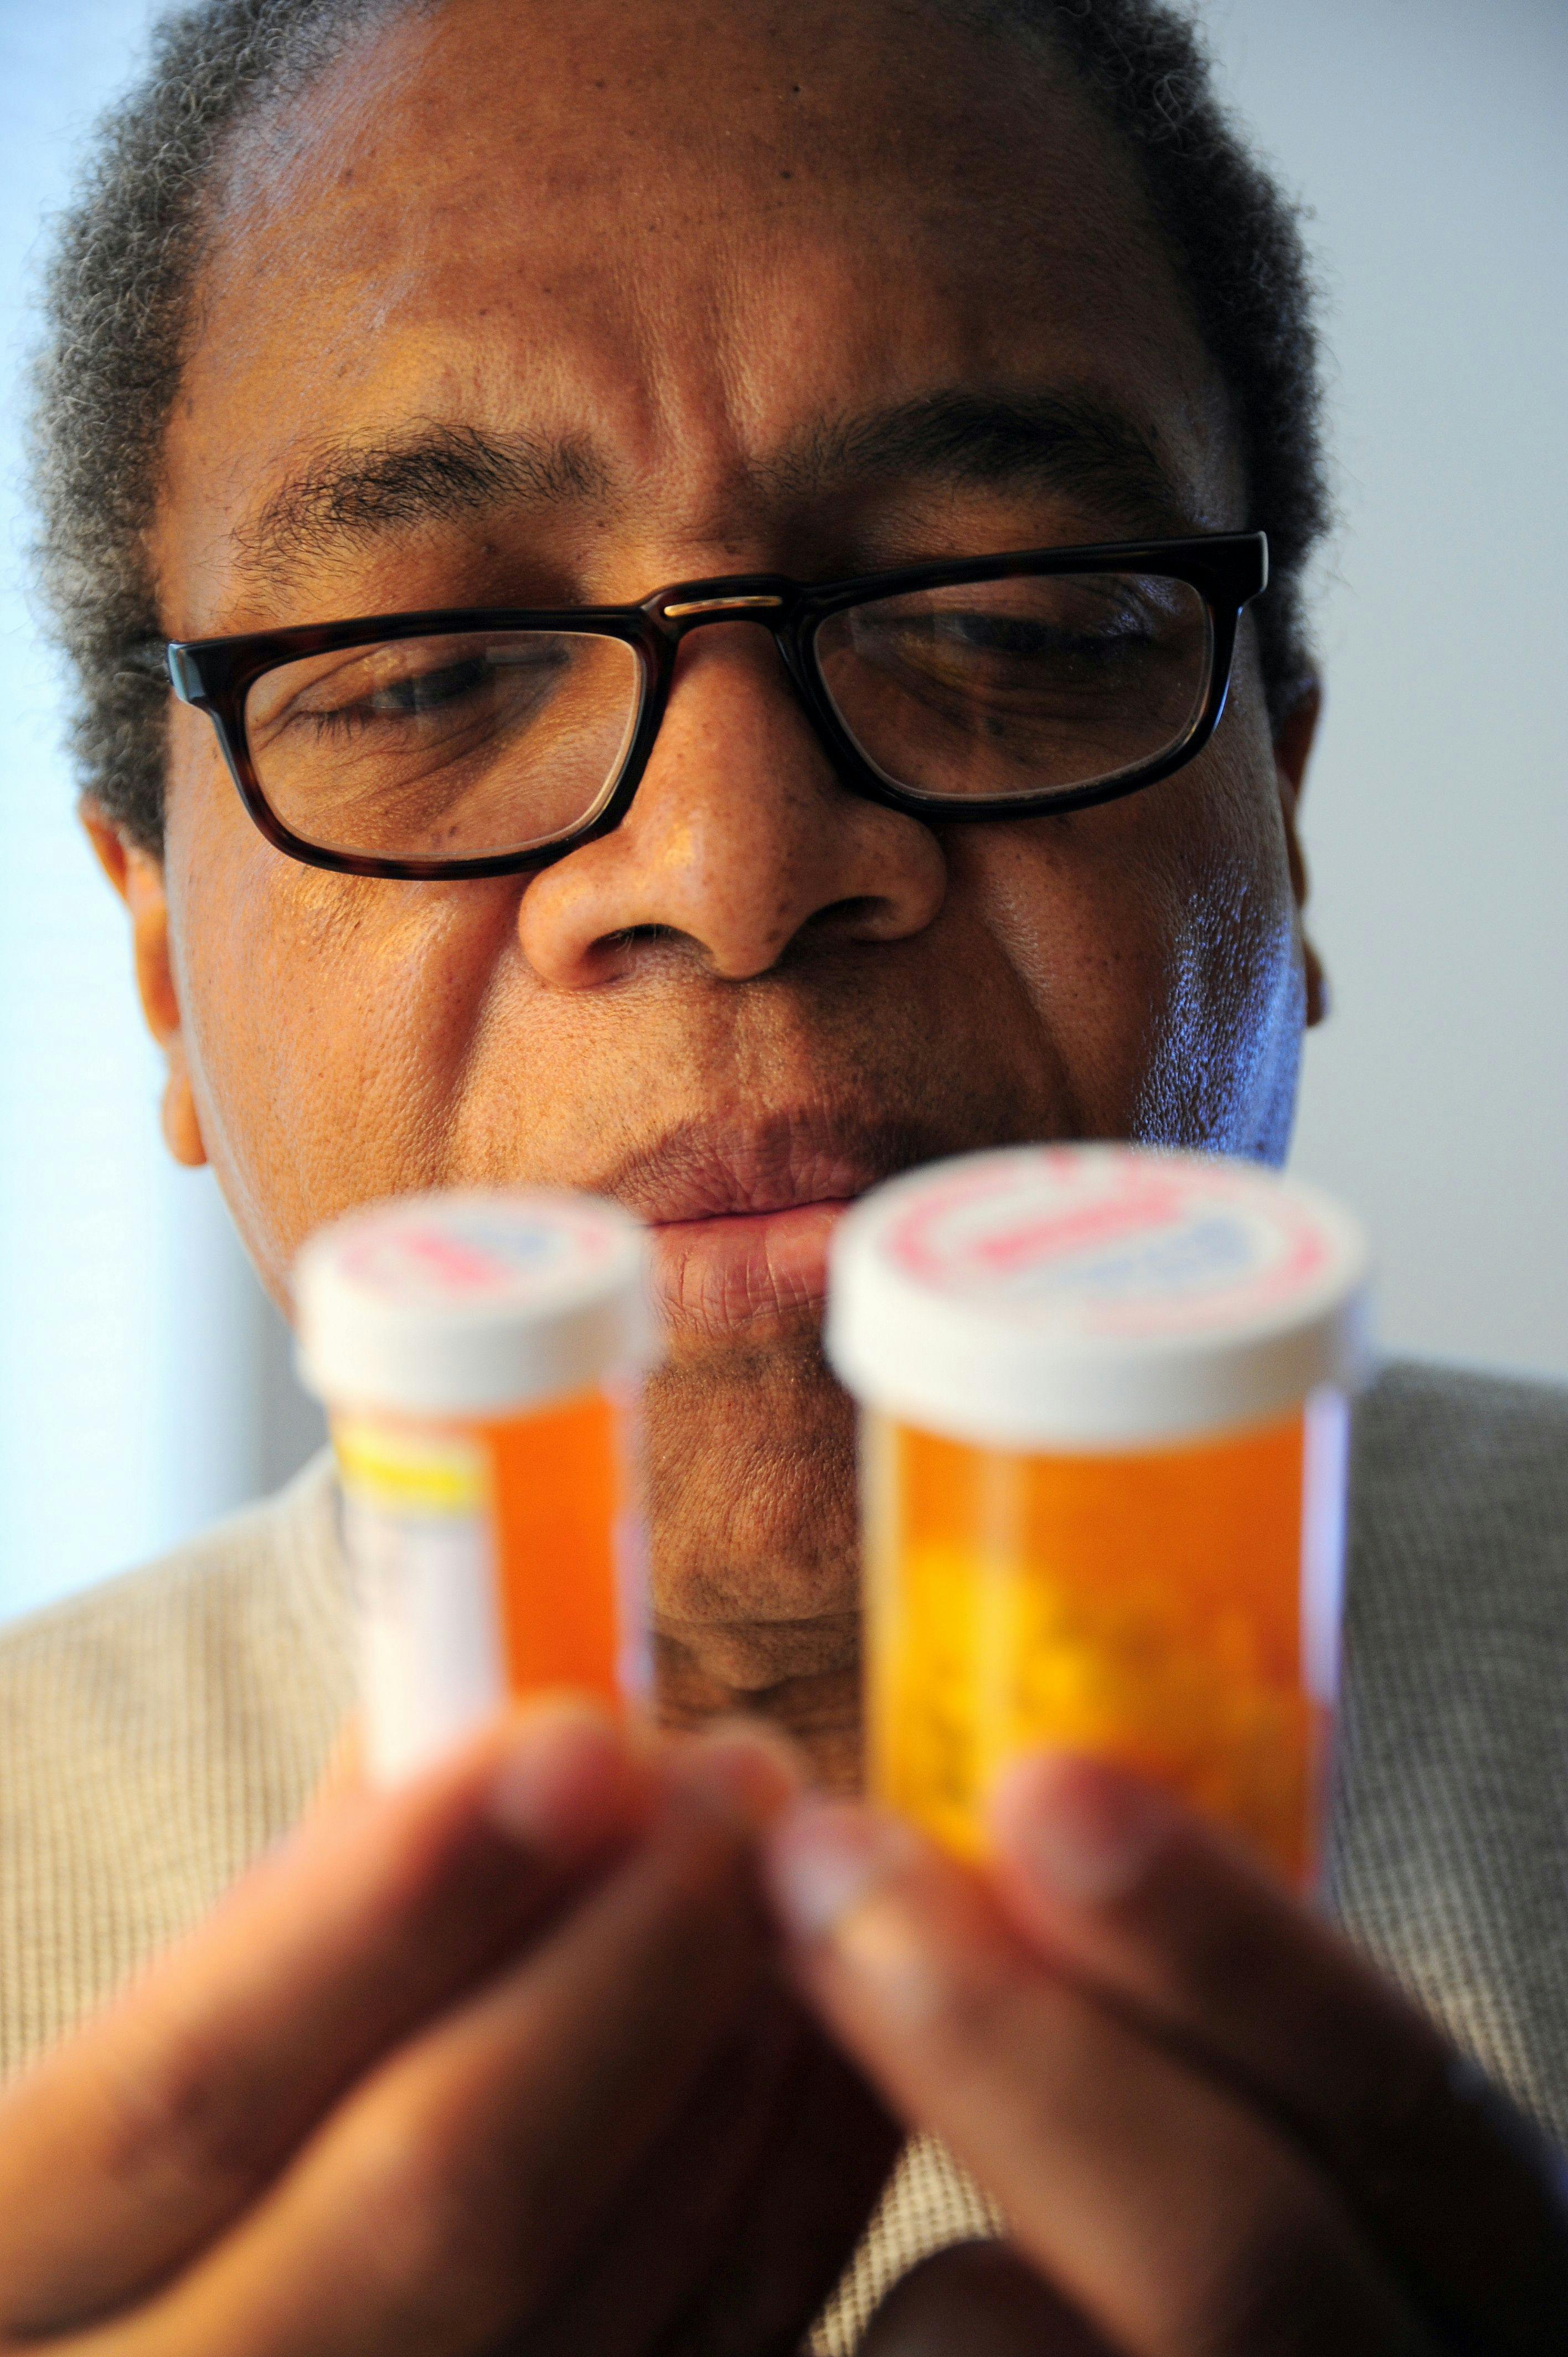 Taking 8-Plus Medications Before Cancer Treatment May Affect Effectiveness in Older Patients